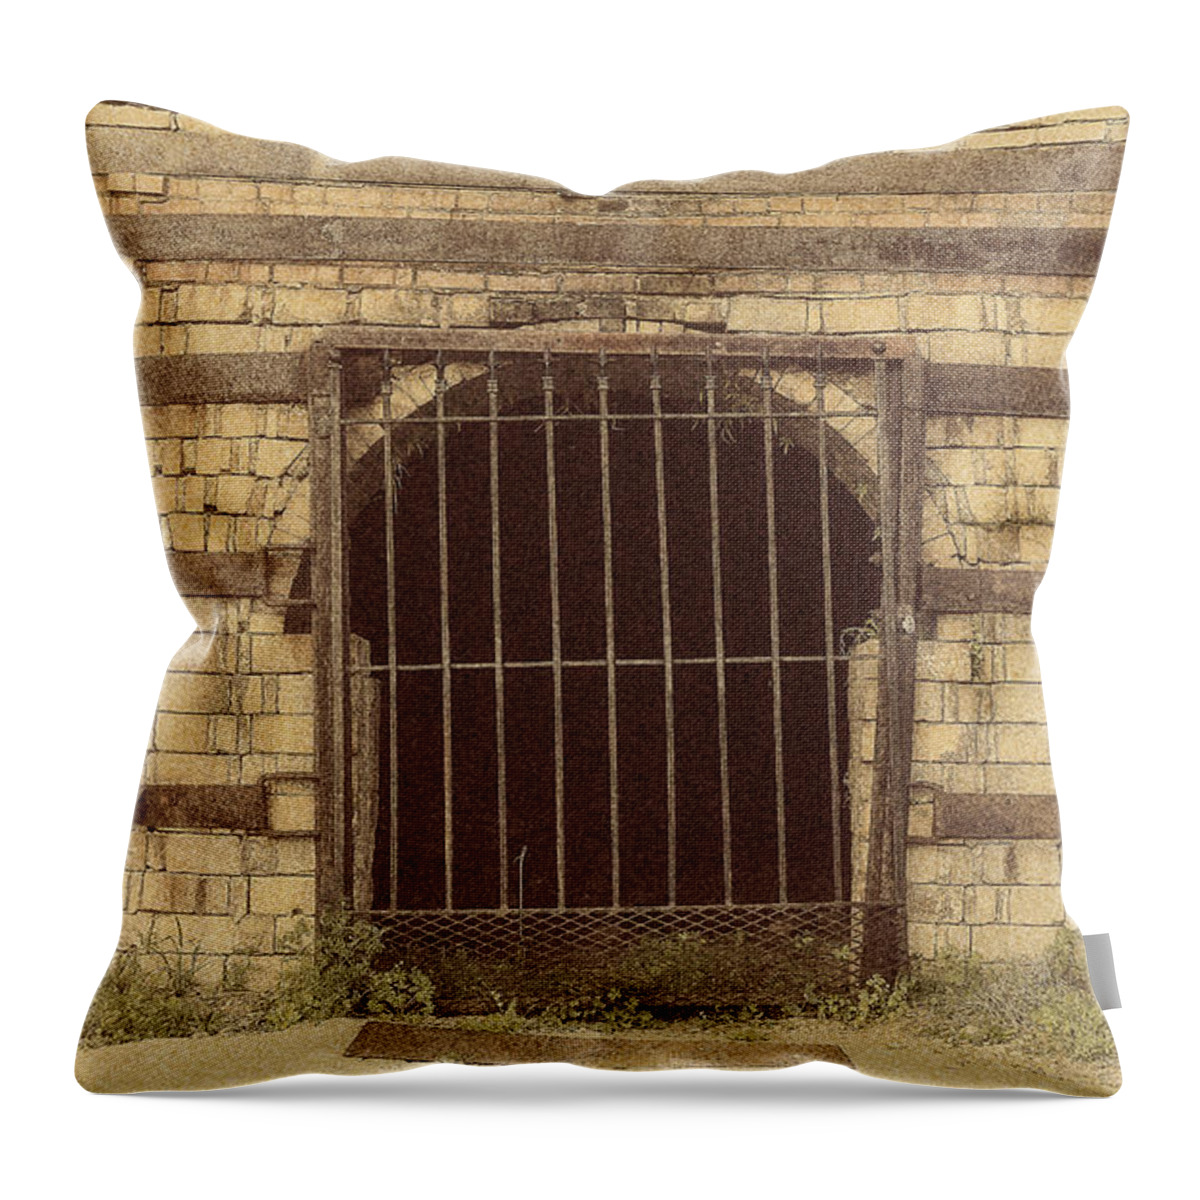 2014 Throw Pillow featuring the photograph Guignard Kilns-2 by Charles Hite